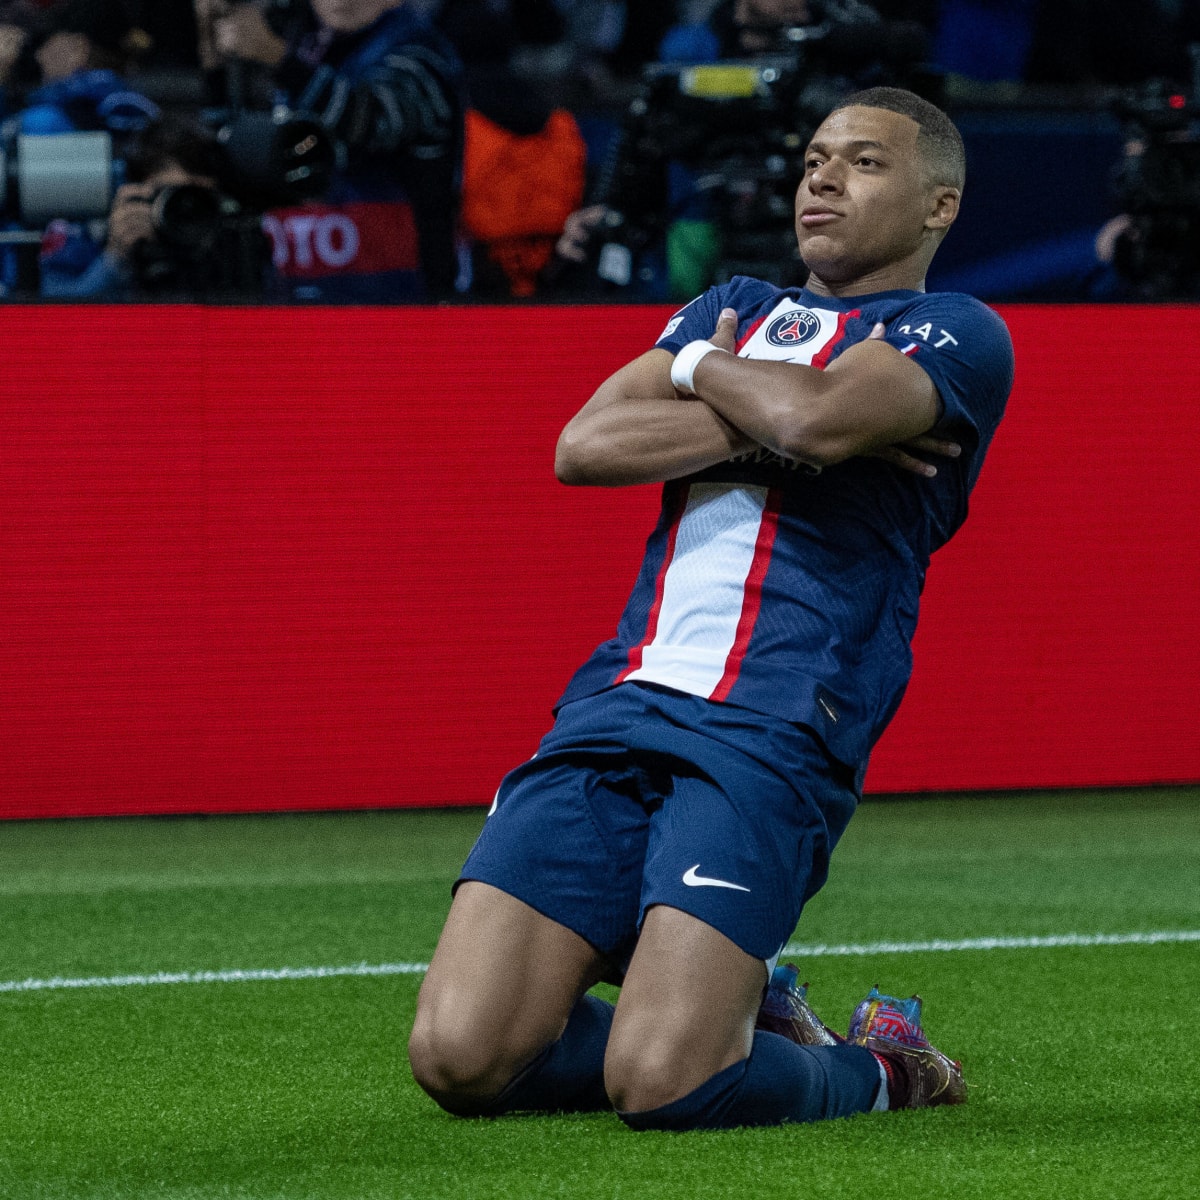 Kylian Mbappe prepared to sit out entire season and leave Paris St-Germain  on free transfer next summer amid contract standoff, Football News